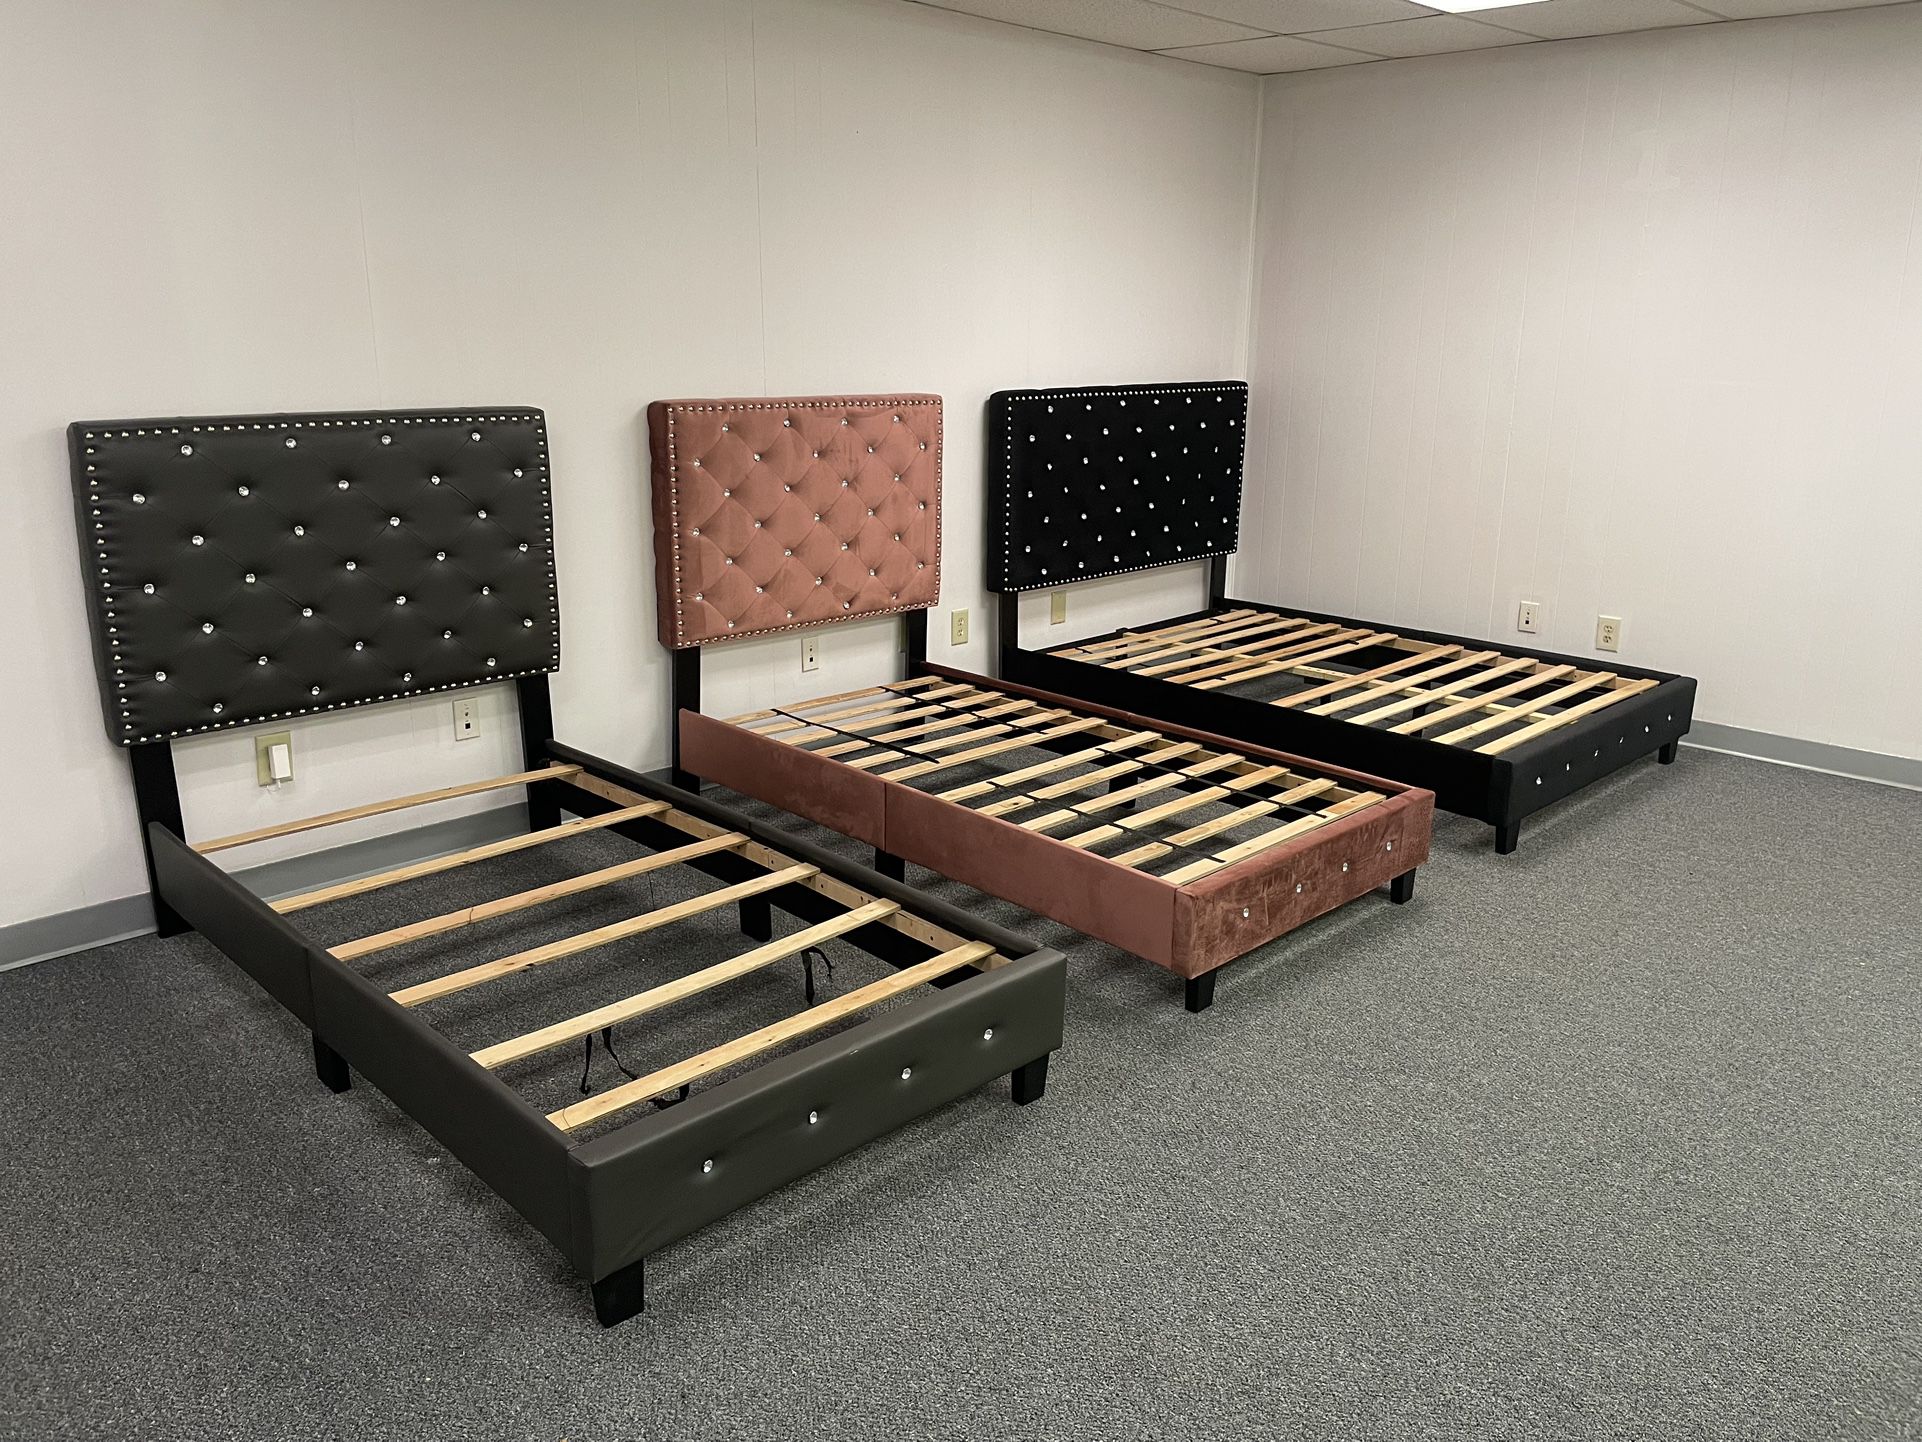 TWIN & FULL BED FRAMES !! GET 2 TWINS FOR $380 Or 2 FULLS FOR $480!!